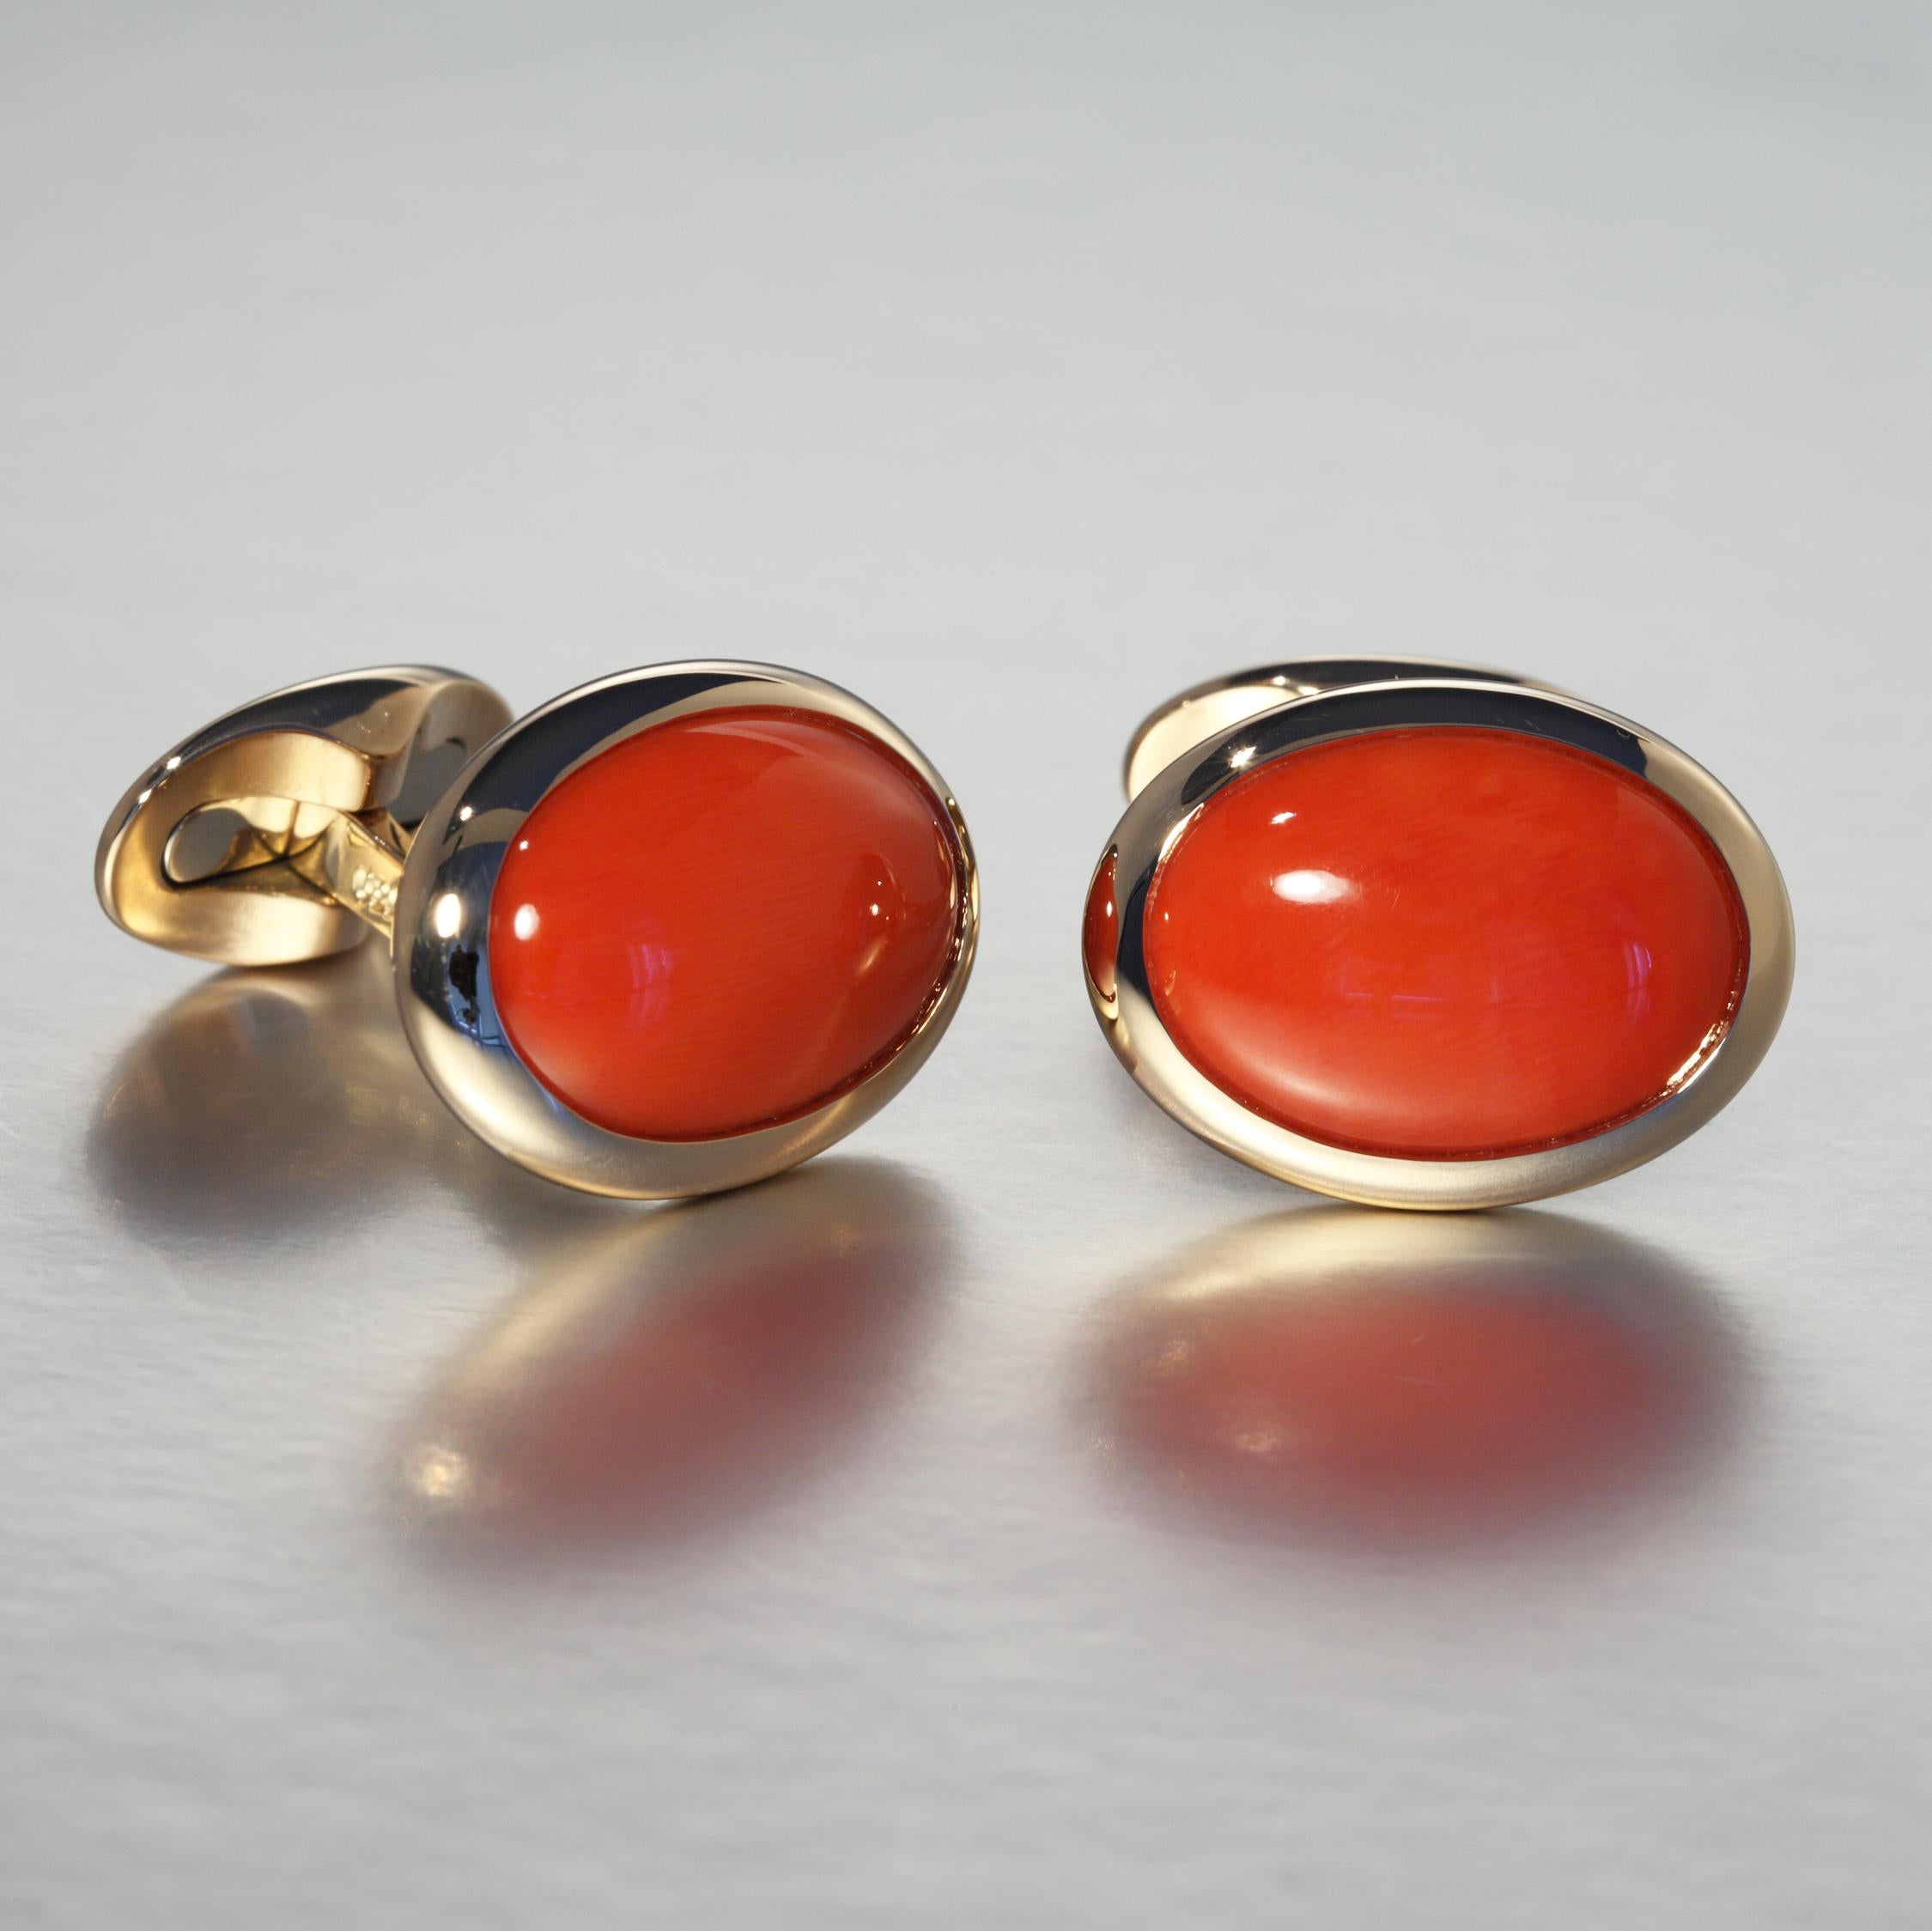 This pair of cufflinks is set with two oval red coral cabochon 18.81 carat in 18 Karat rose gold. The cufflinks are hand made in Zurich, Switzerland by Robert Vogelsang and are one of a kind piece signed RV.

The cufflinks are set in 18 Karat rose